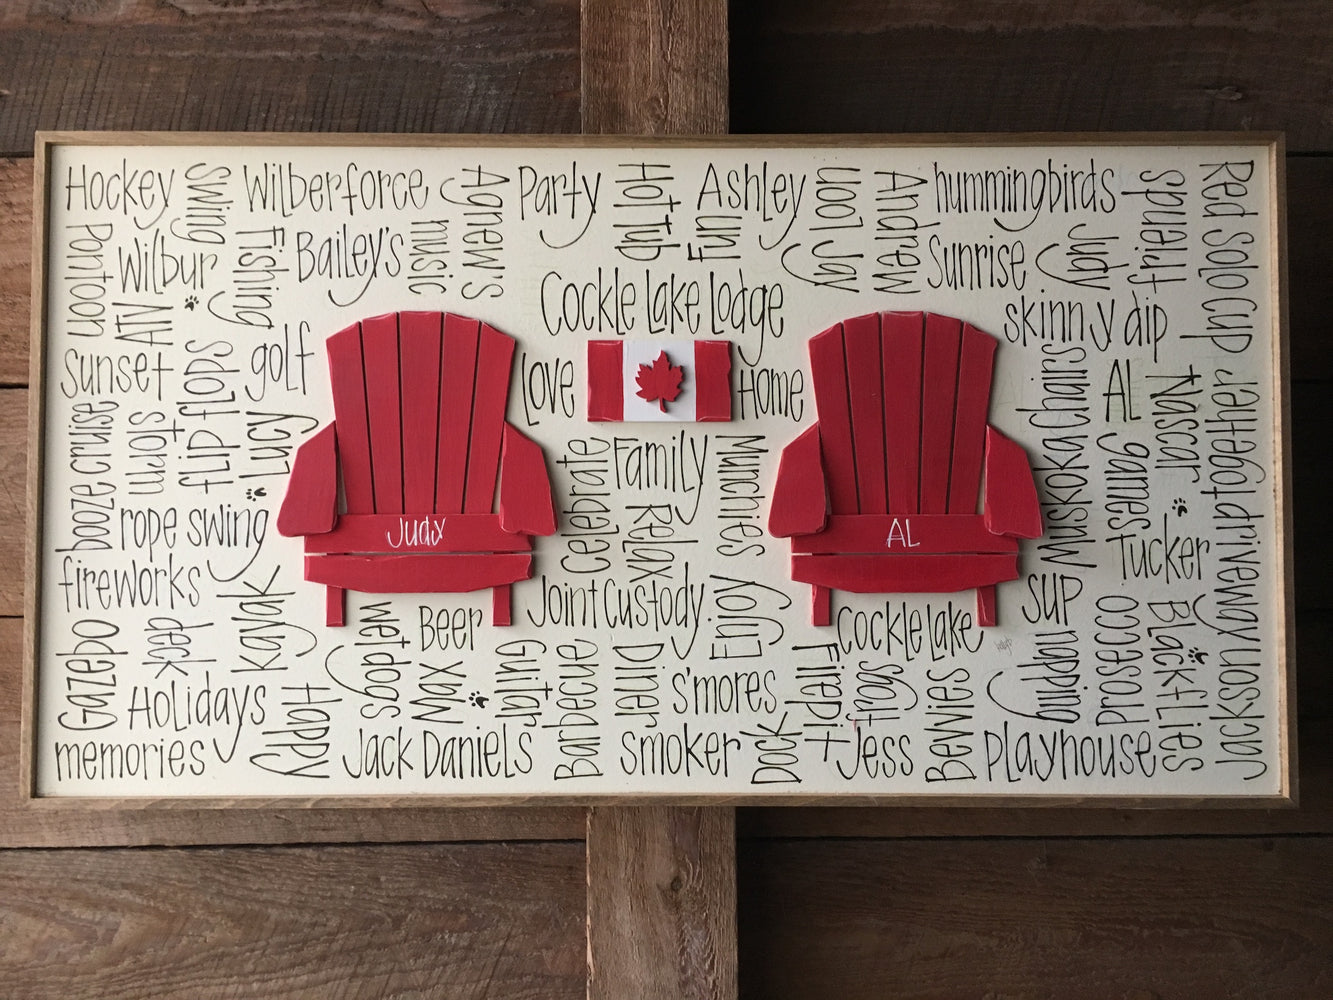 2 Chairs & More (heart/flag/campfire) 16"x30"